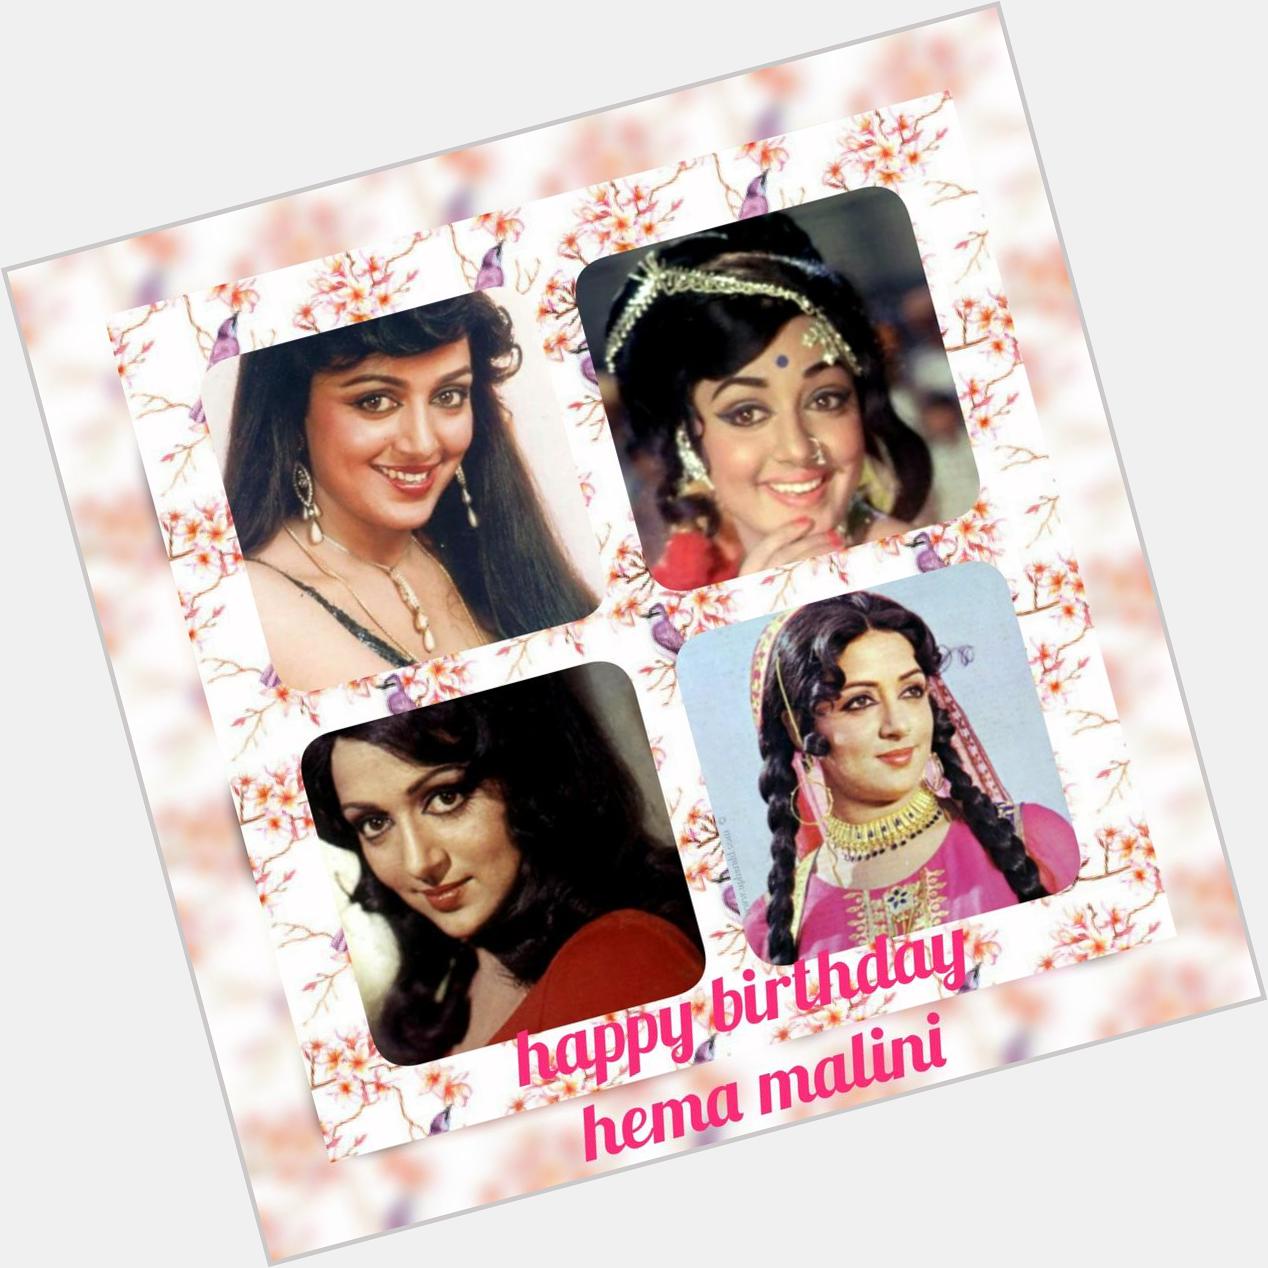 Happy bday Hema Malini
a lot of happiness and love.
stay amazing like you are.
god bless you     